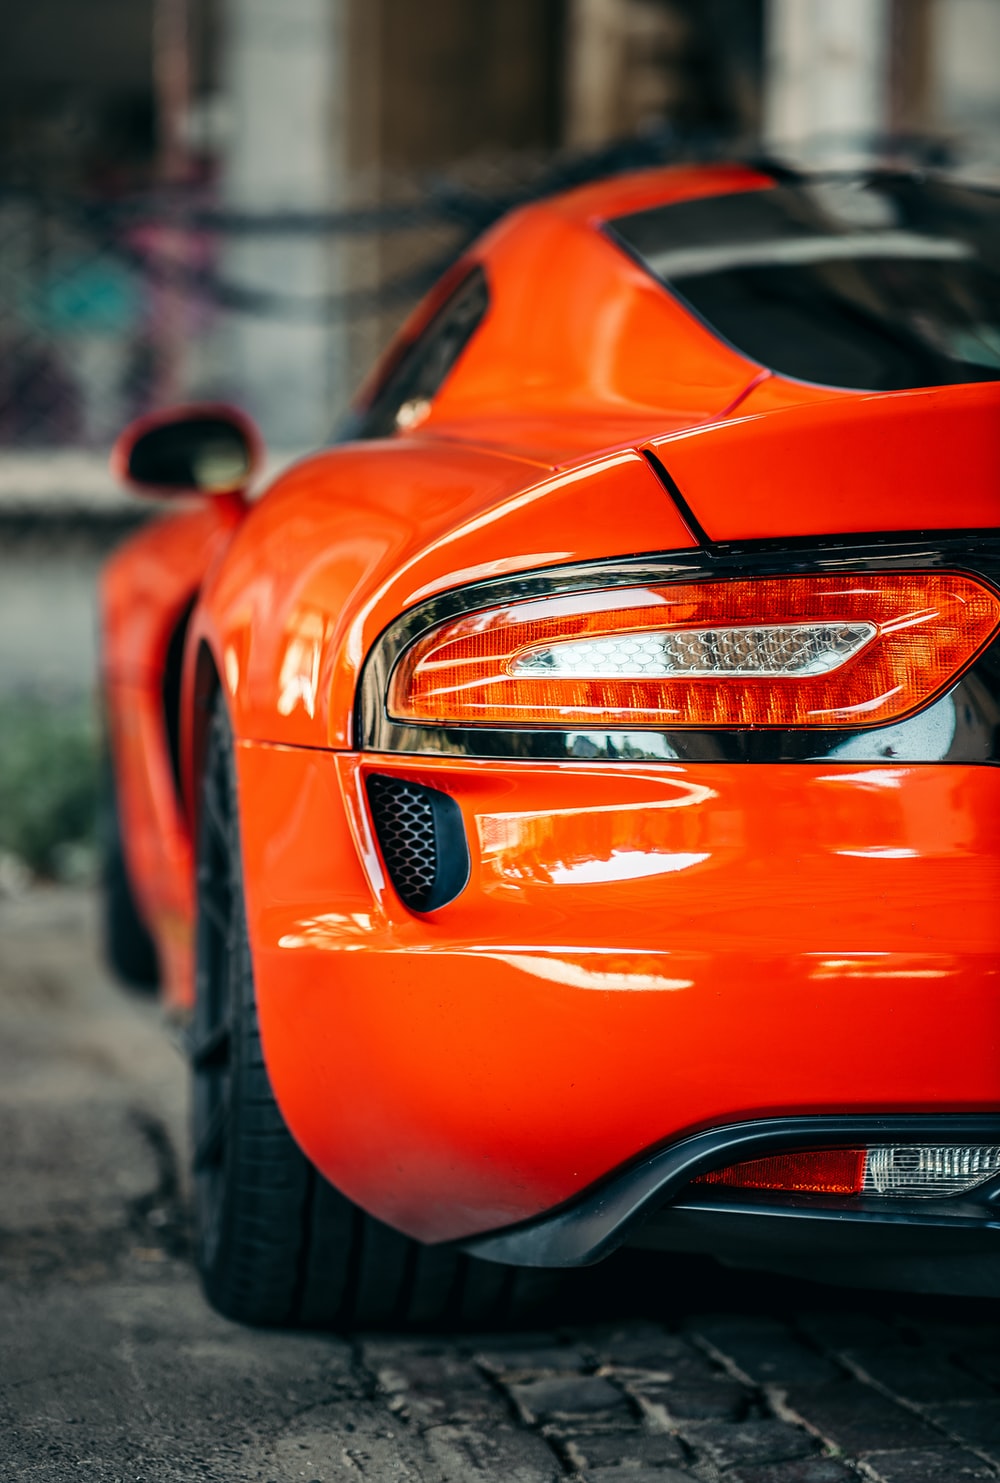 Dodge Viper Pictures Image